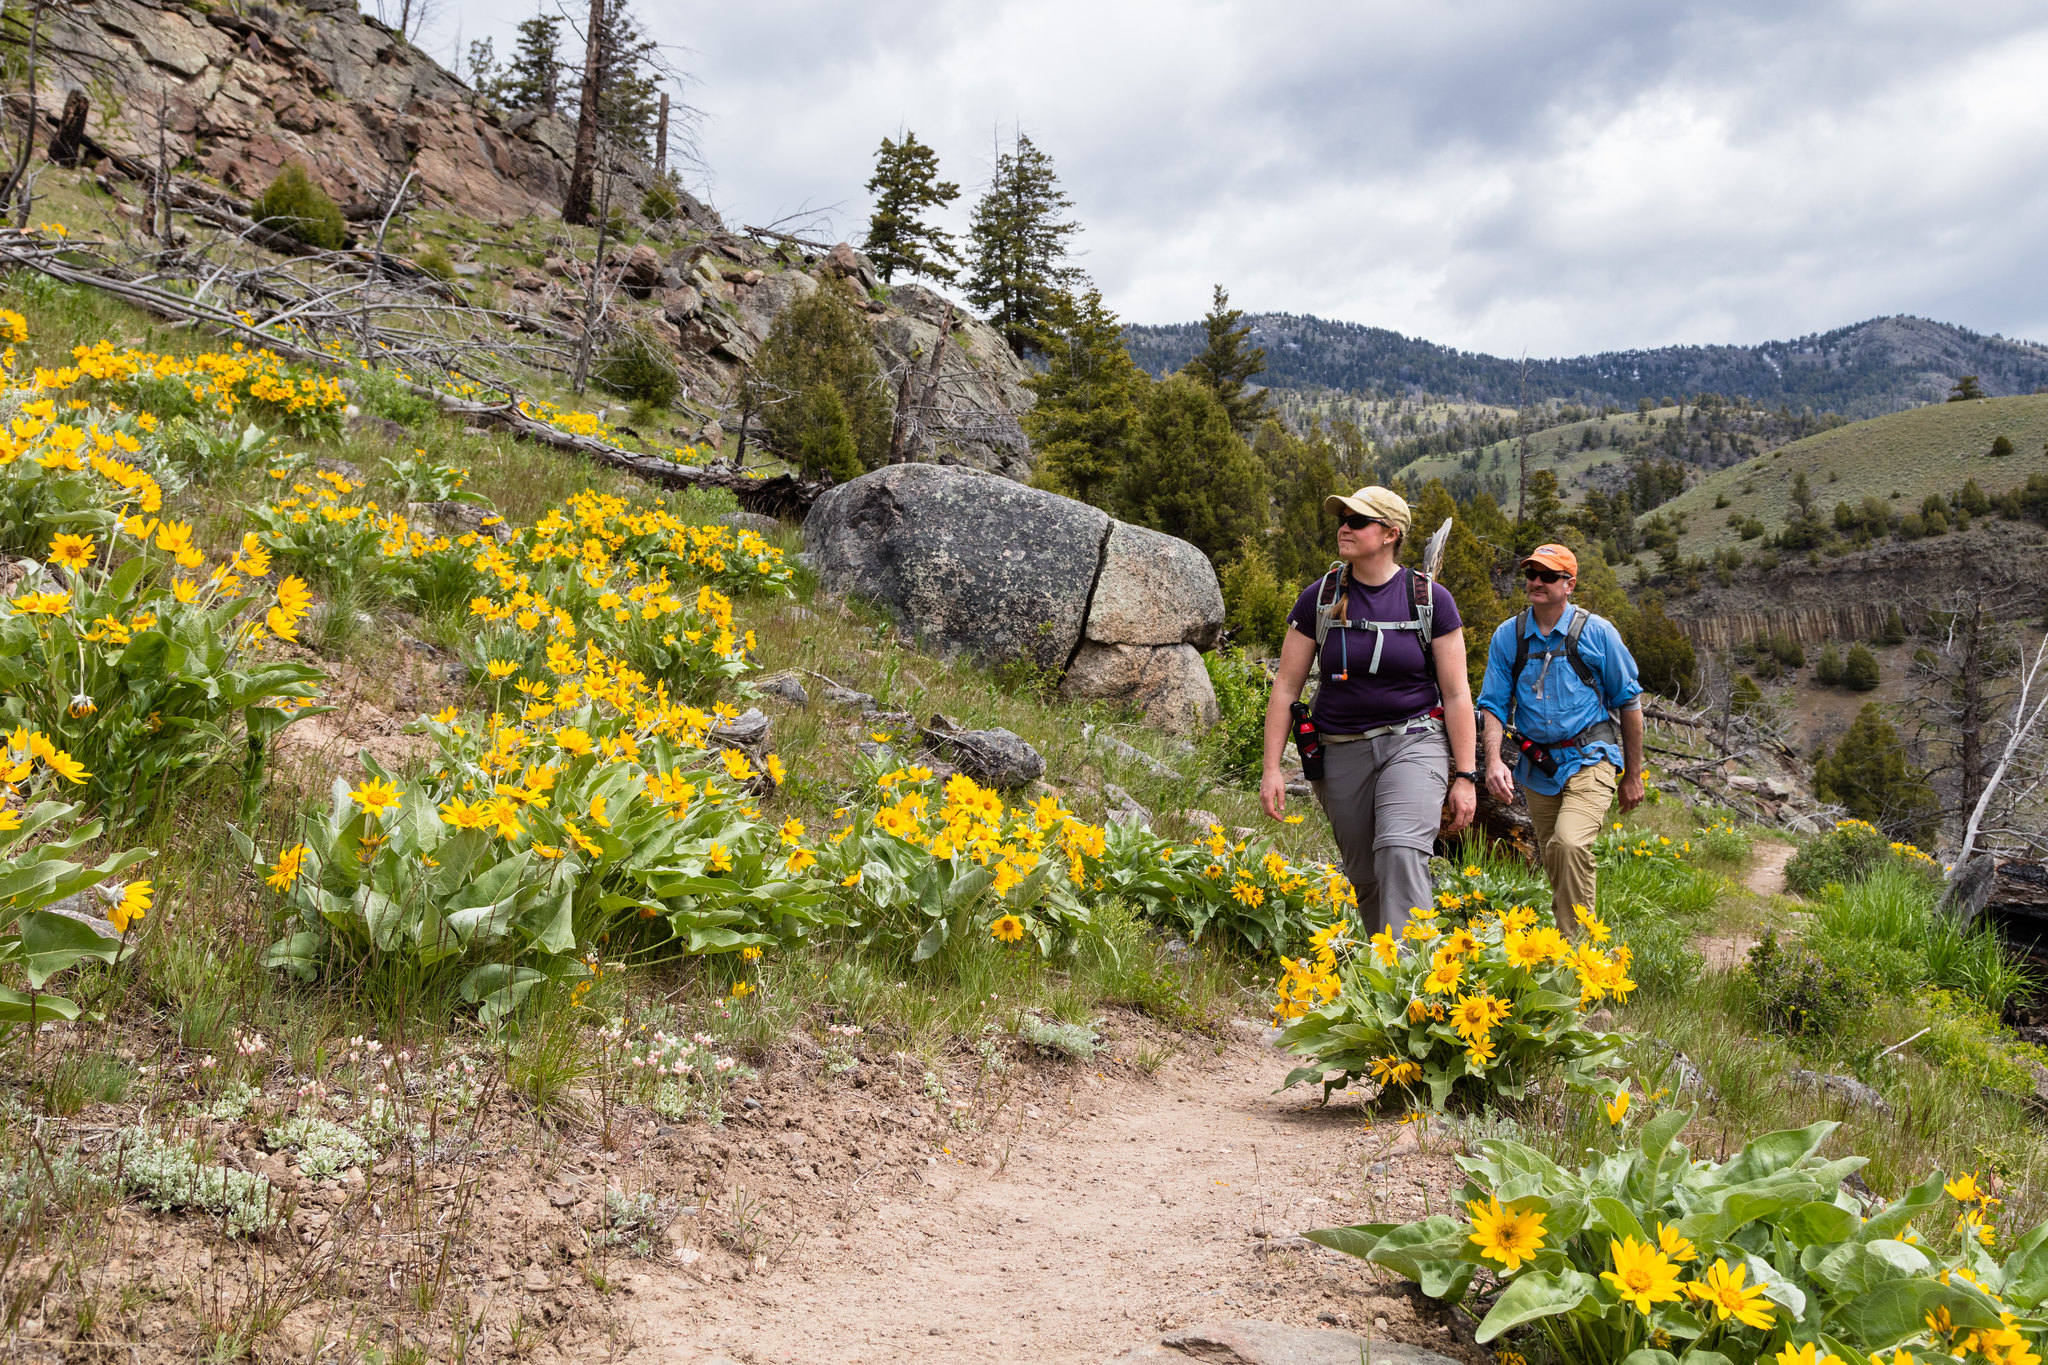 Hikers on trail with yellow flowers